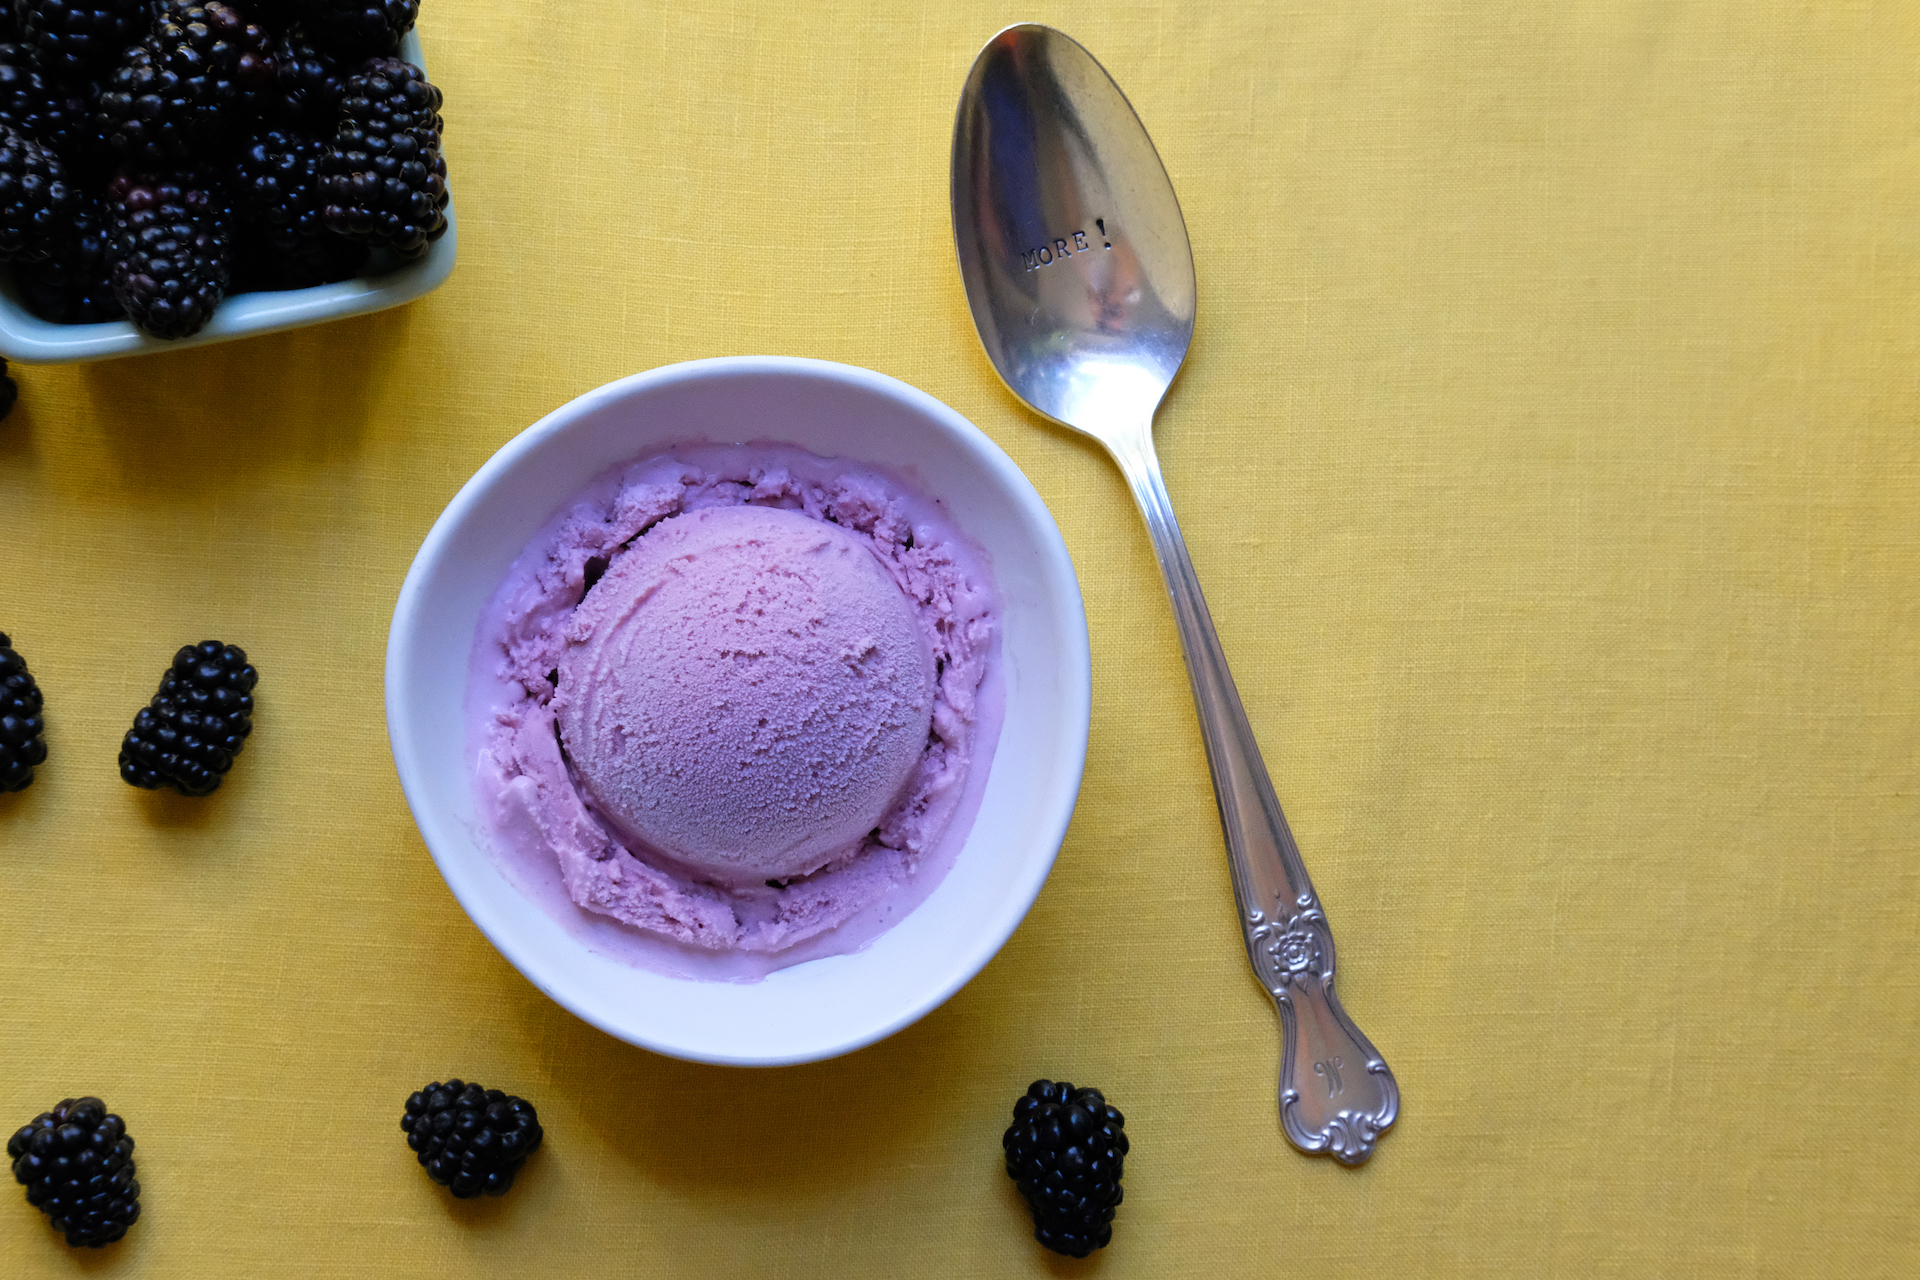 The Juanita MORE! ice cream flavor features blackberry, ginger and whiskey.